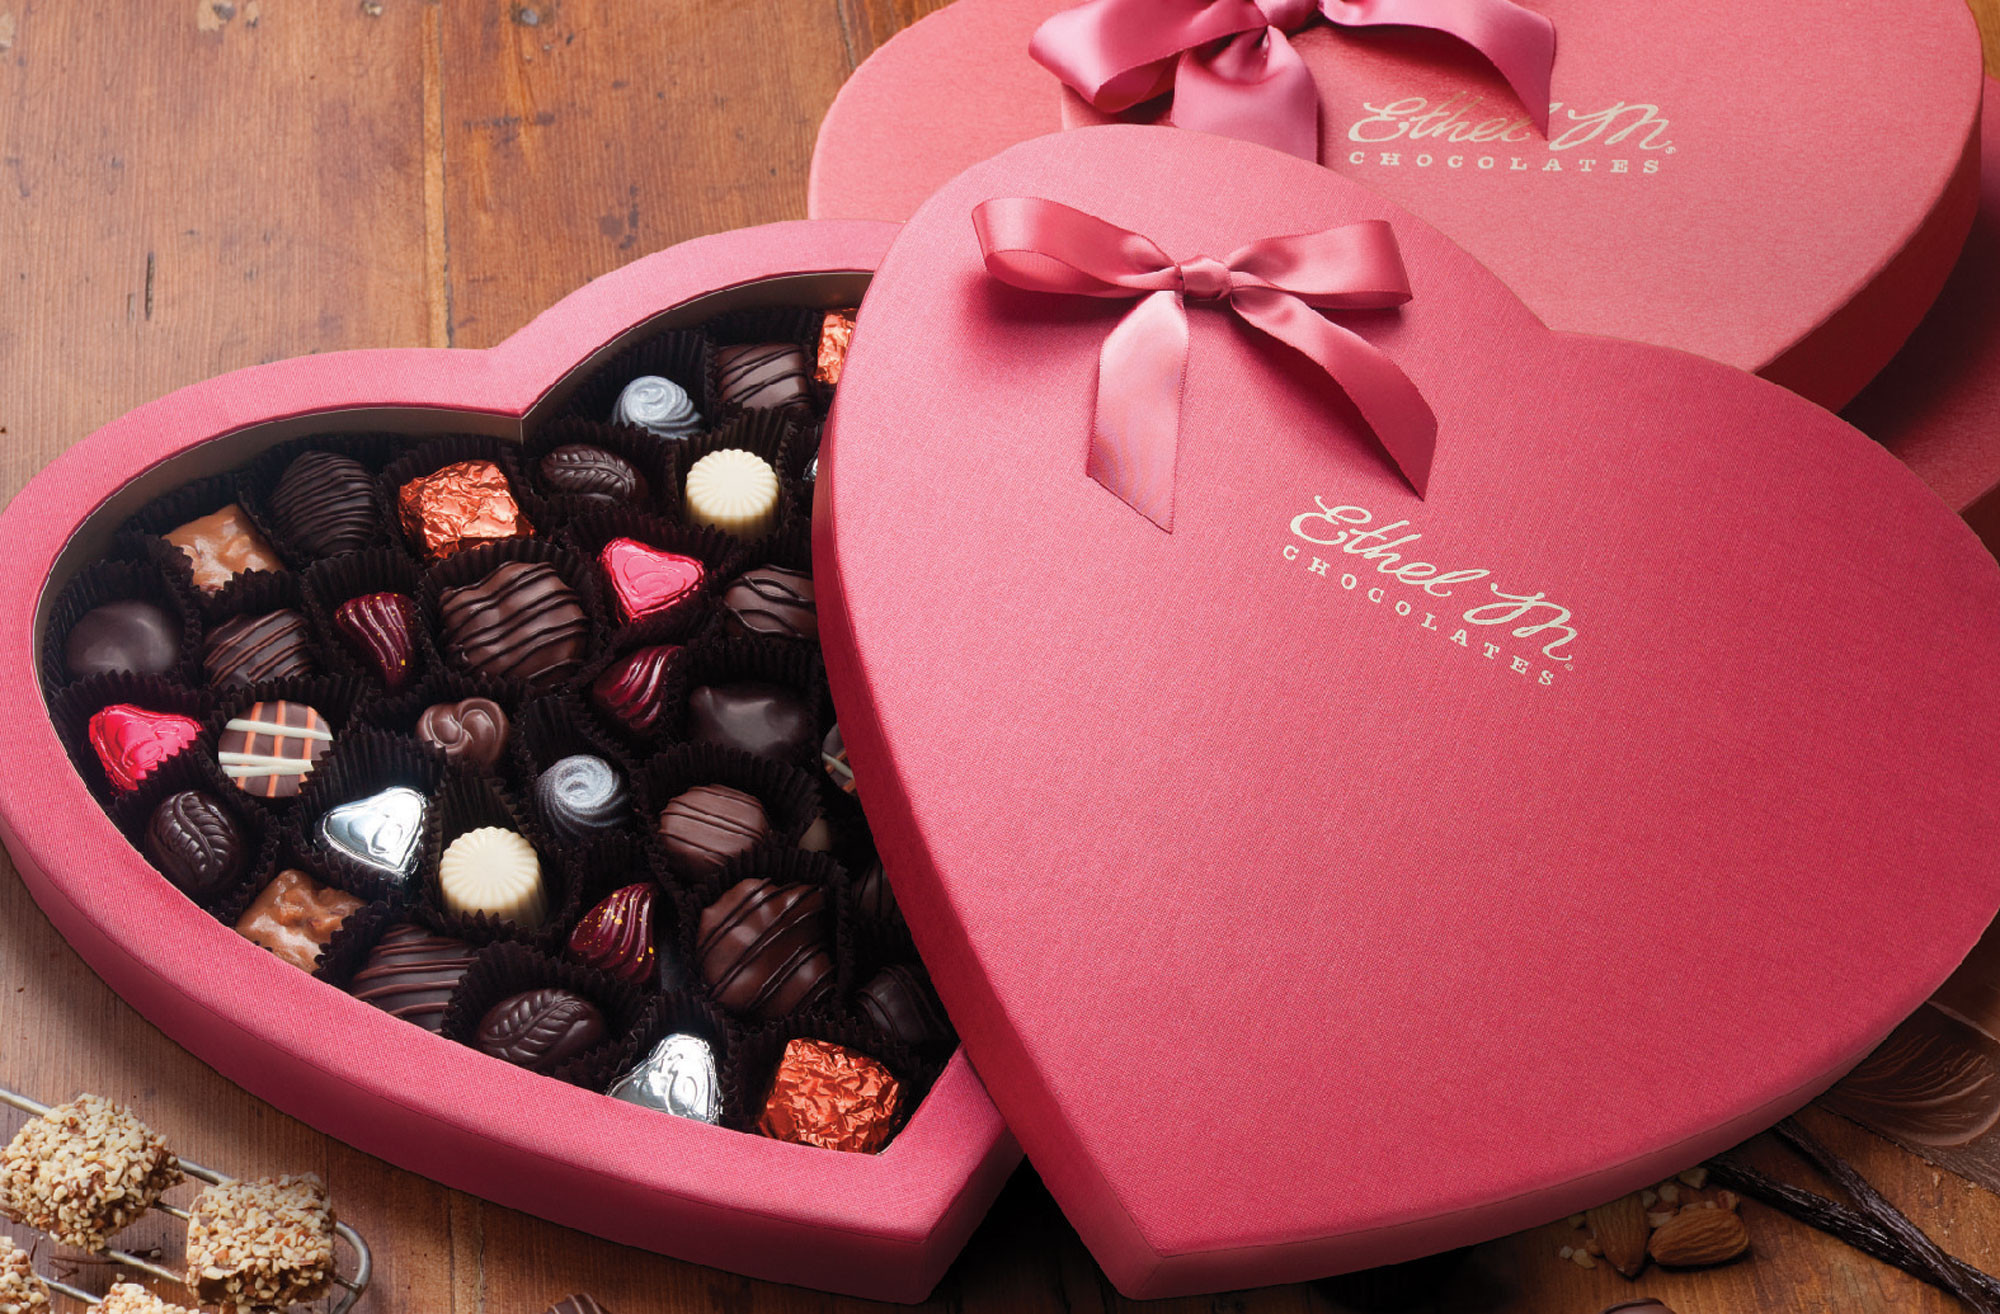 Romantic Valentines Day Gift Ideas For Her
 12 Best Valentines Gift Ideas For Her in This 2016